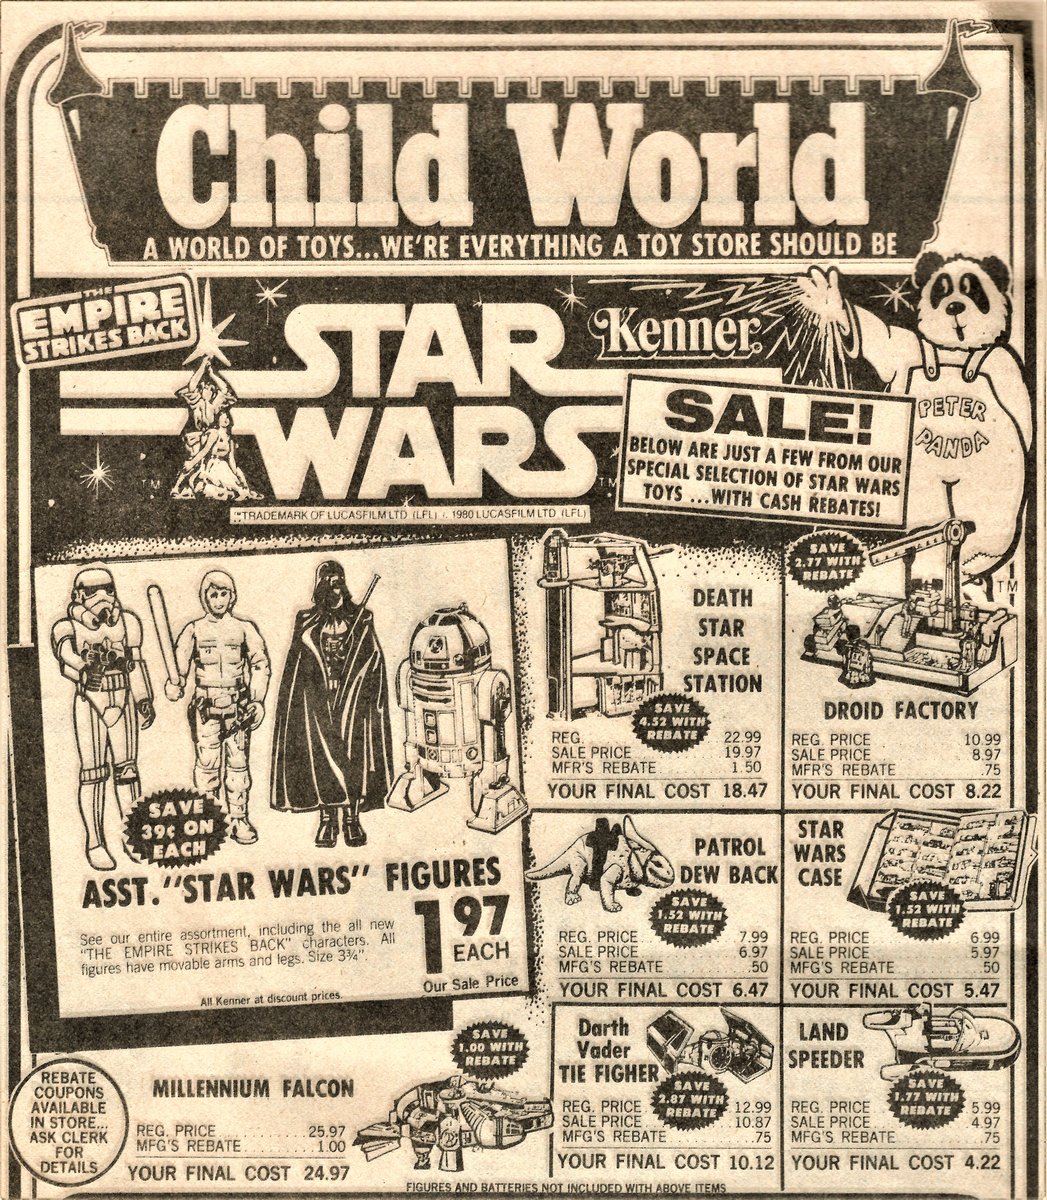 May the 4th be with you! 🐼
Child World  'A WORLD OF TOYS... WE'RE EVERYTHING A TOY STORE SHOULD BE.'
As advertised at Child World on June 1, 1980
#ChildWorld #ChilrensPalace #Kenner #StarWars #EmpireStrikesBack #Hasbro